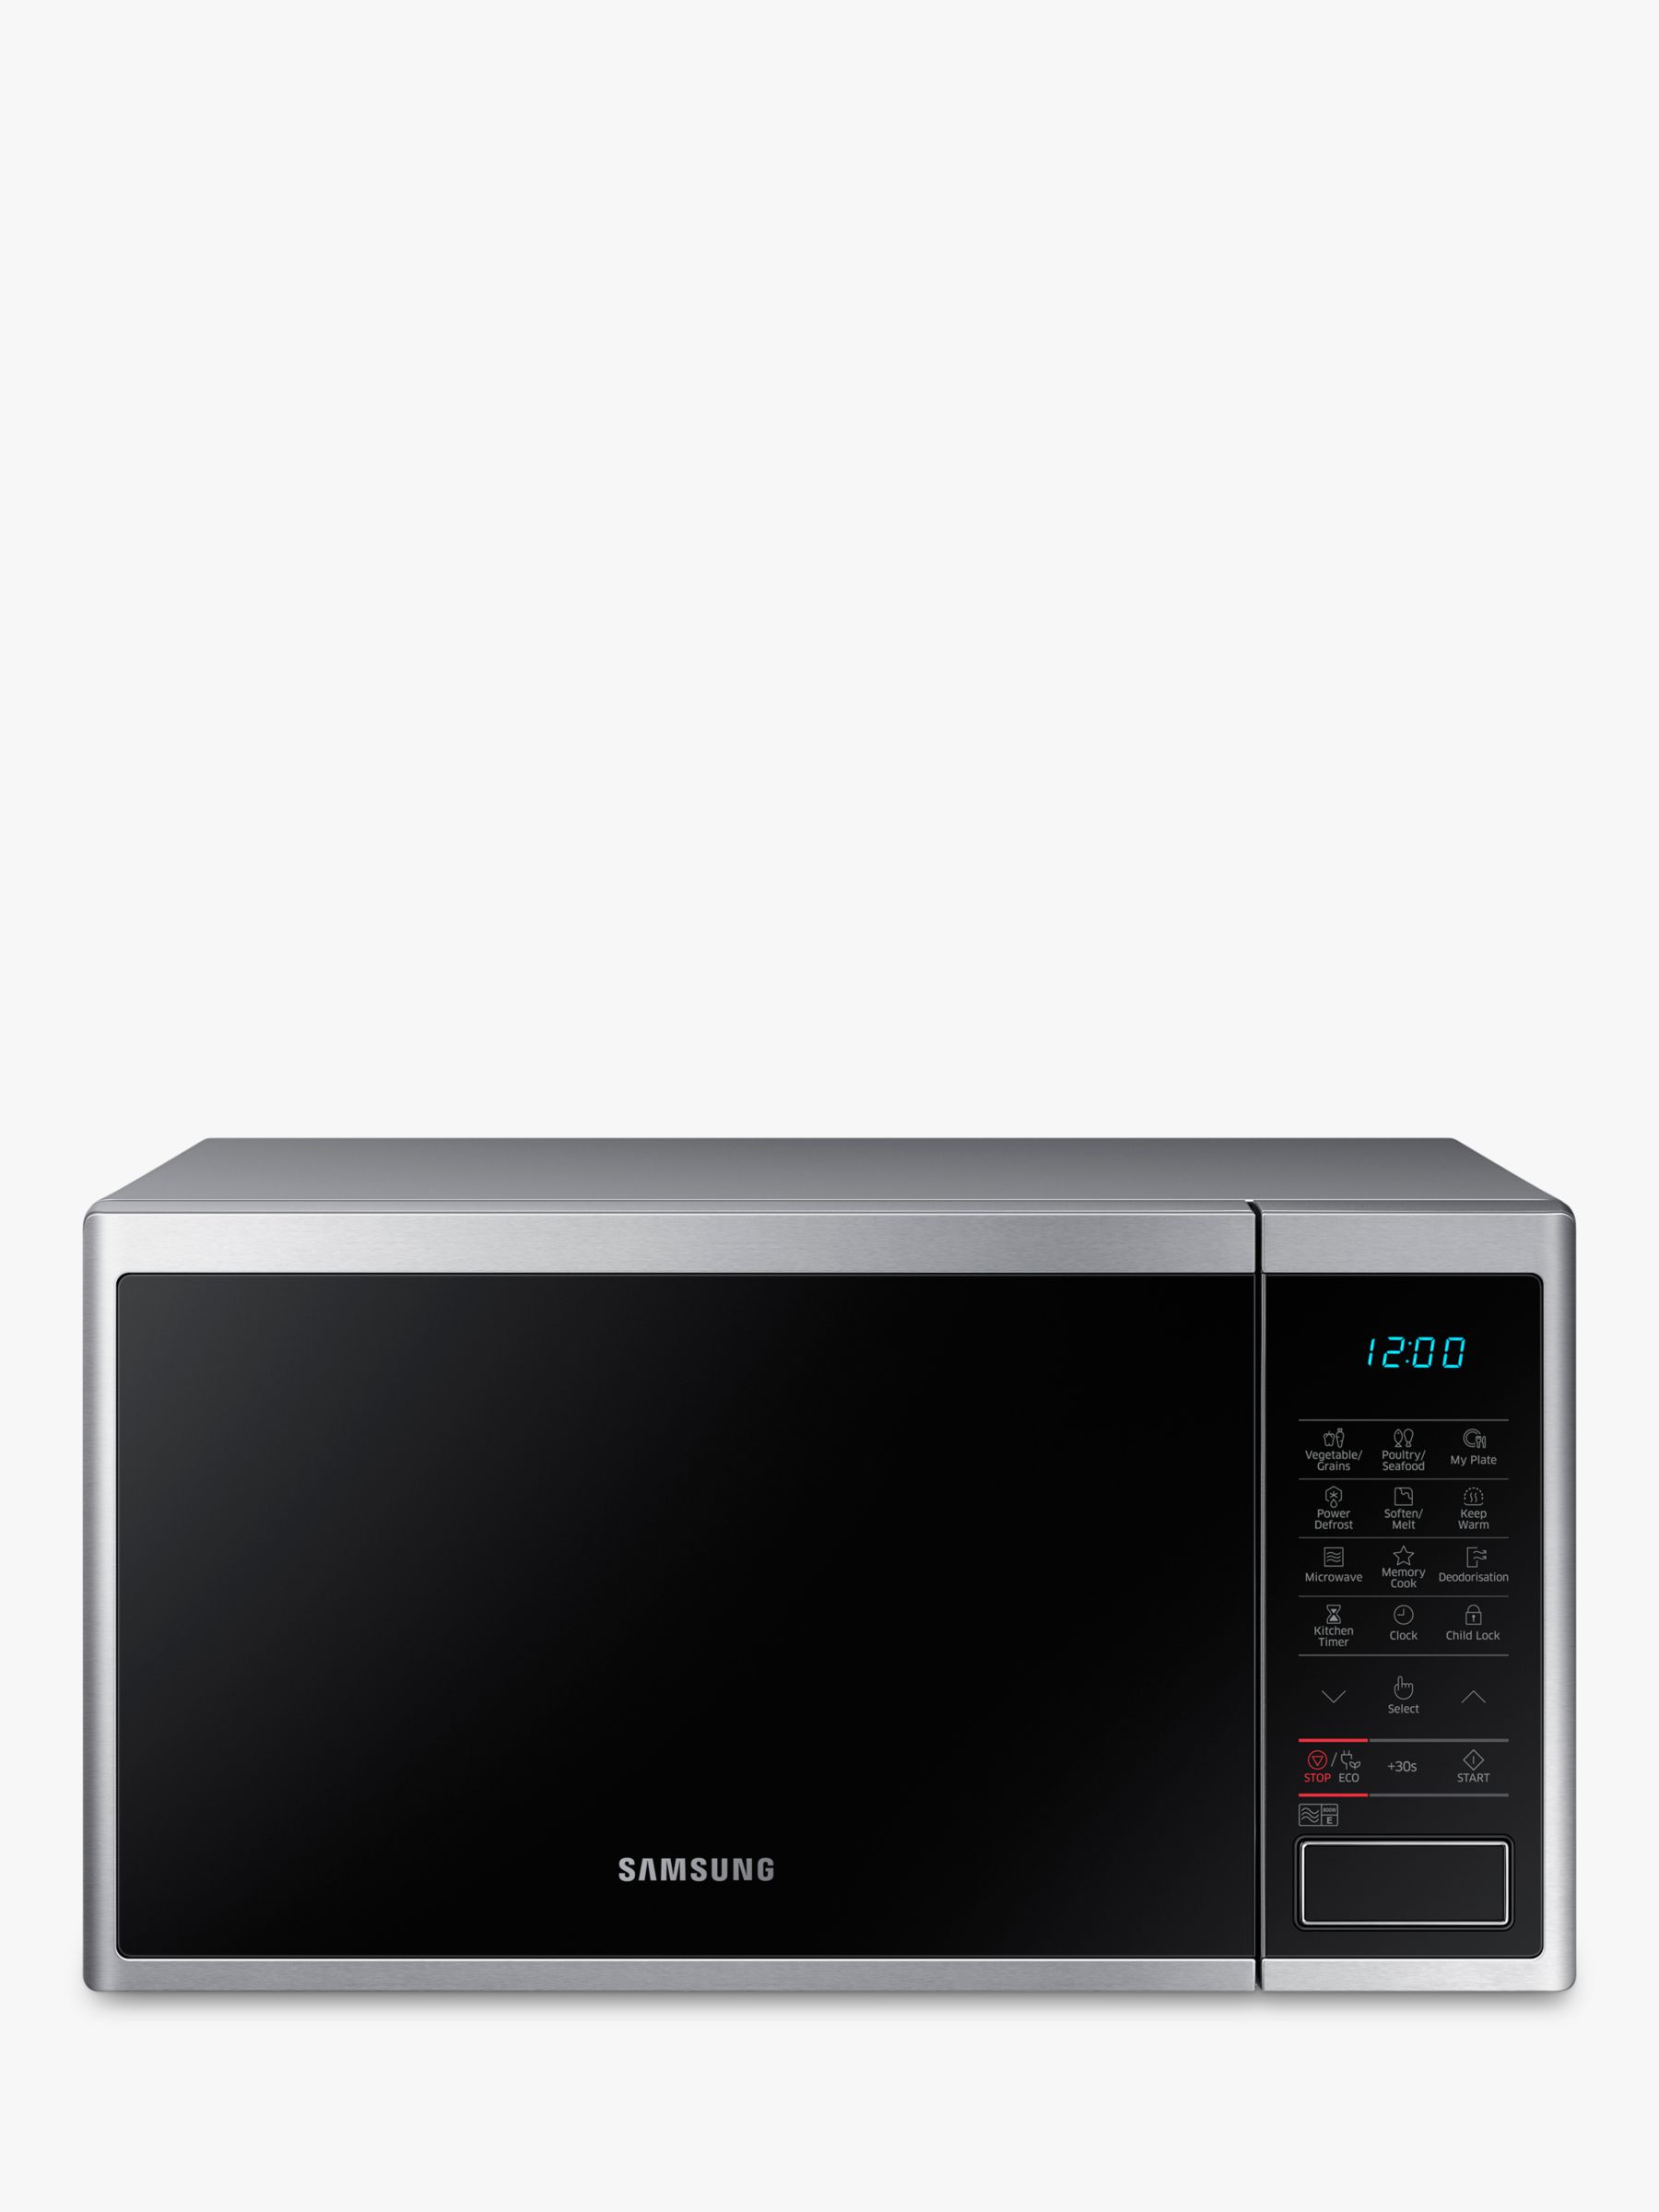 Samsung MS23J5133AT Microwave Oven, Stainless Steel